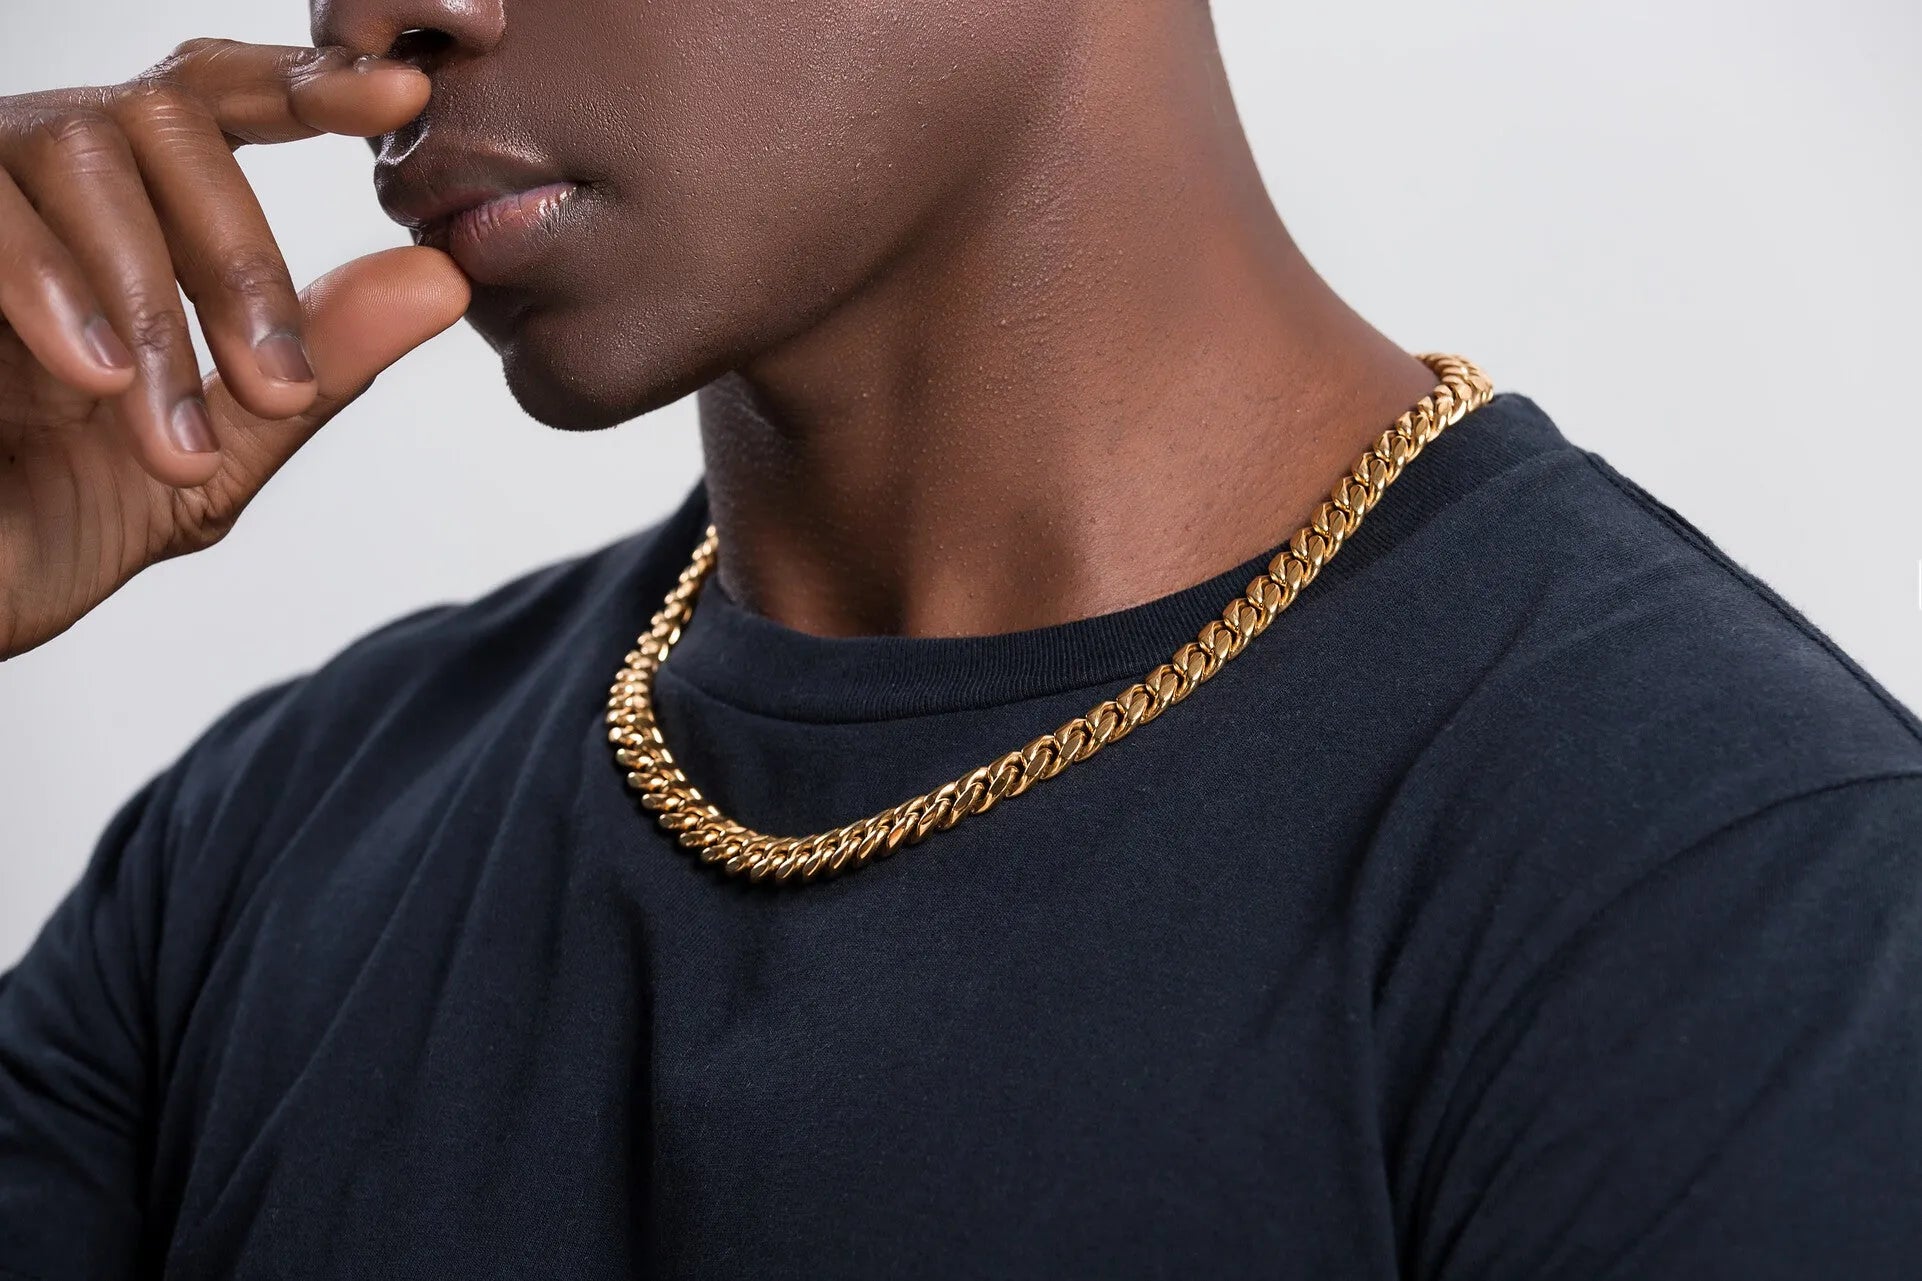 Some Things You Need To Know About The Cuban Link Chain